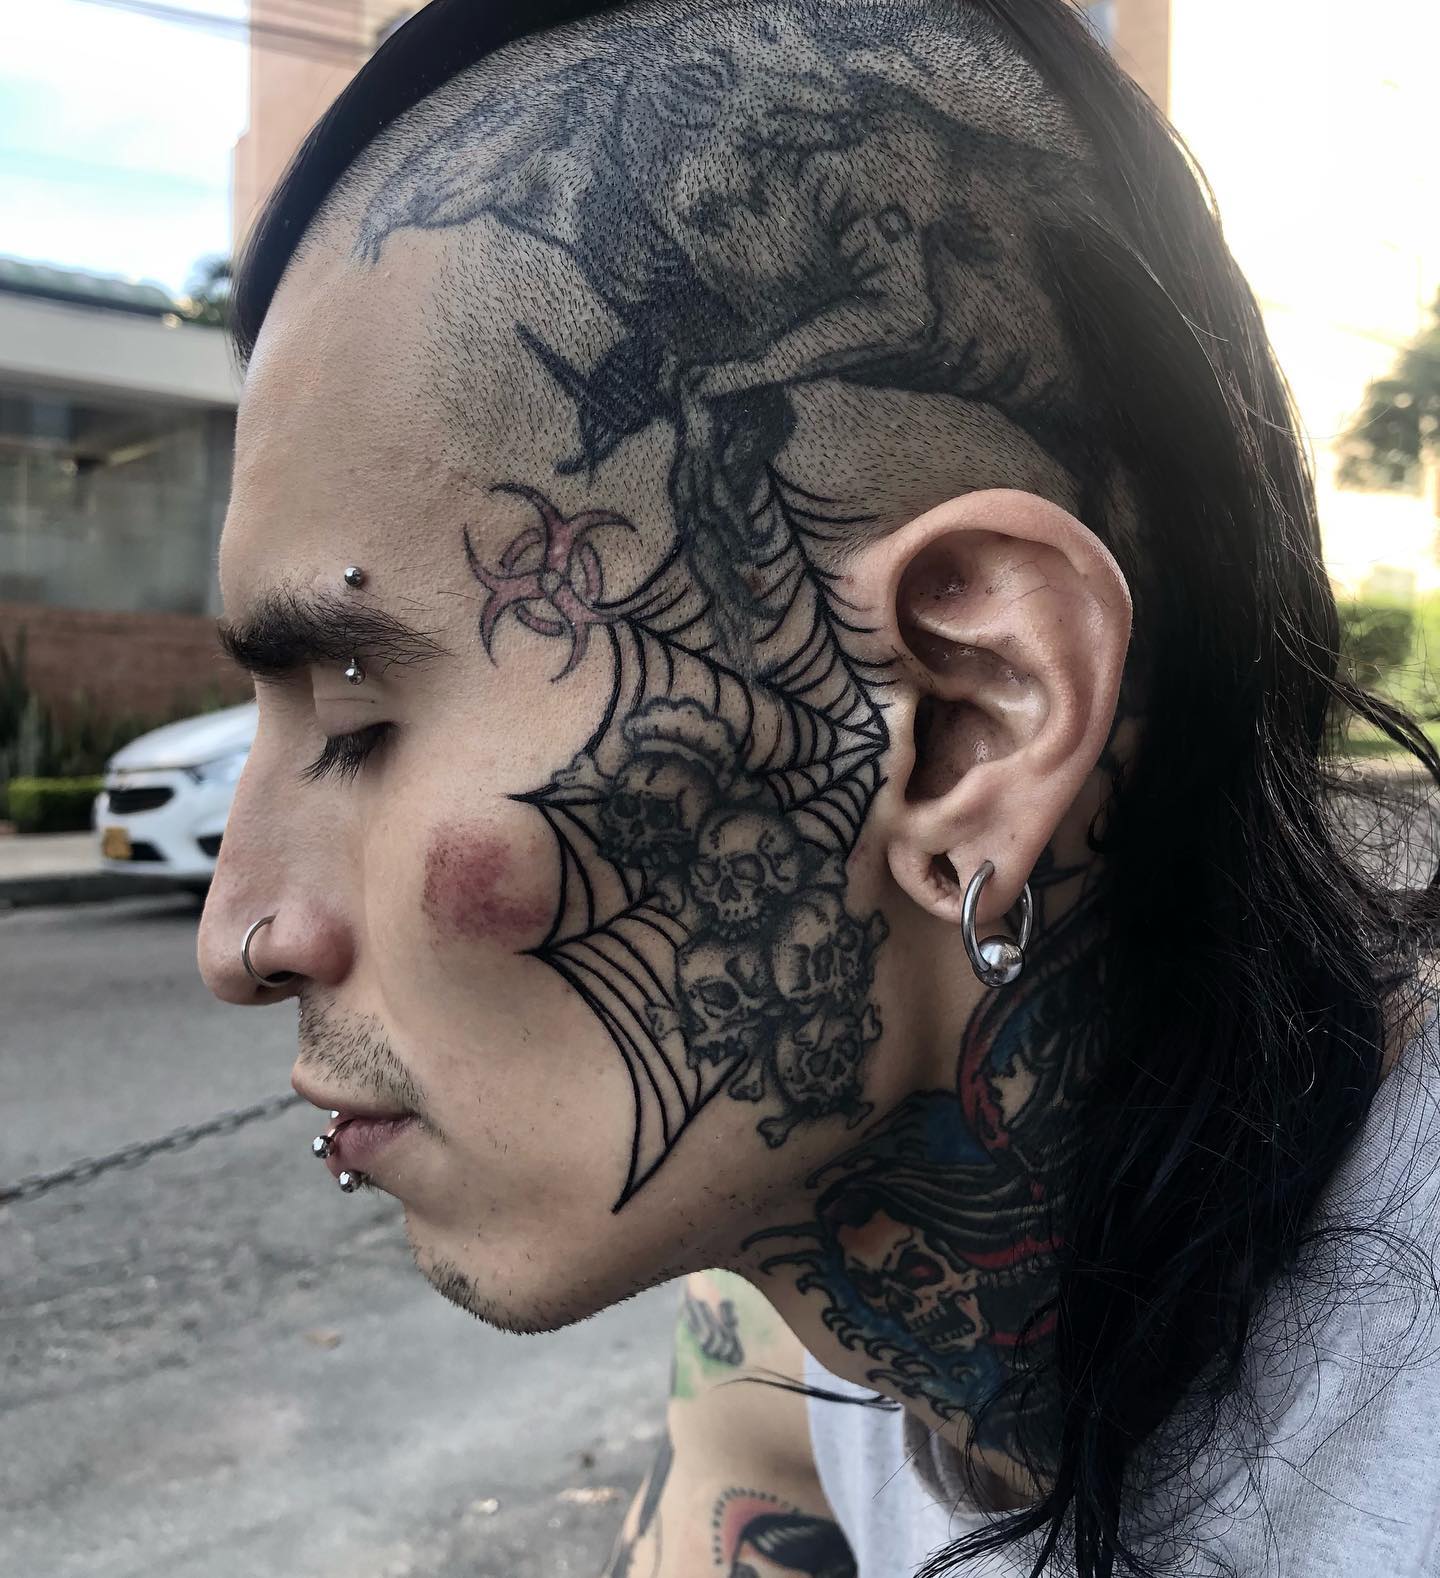 This giant tattoo will take quite some time to get. Guys who don’t mind visible tattoos and those who can rock something as big and bold will like this face tattoo.